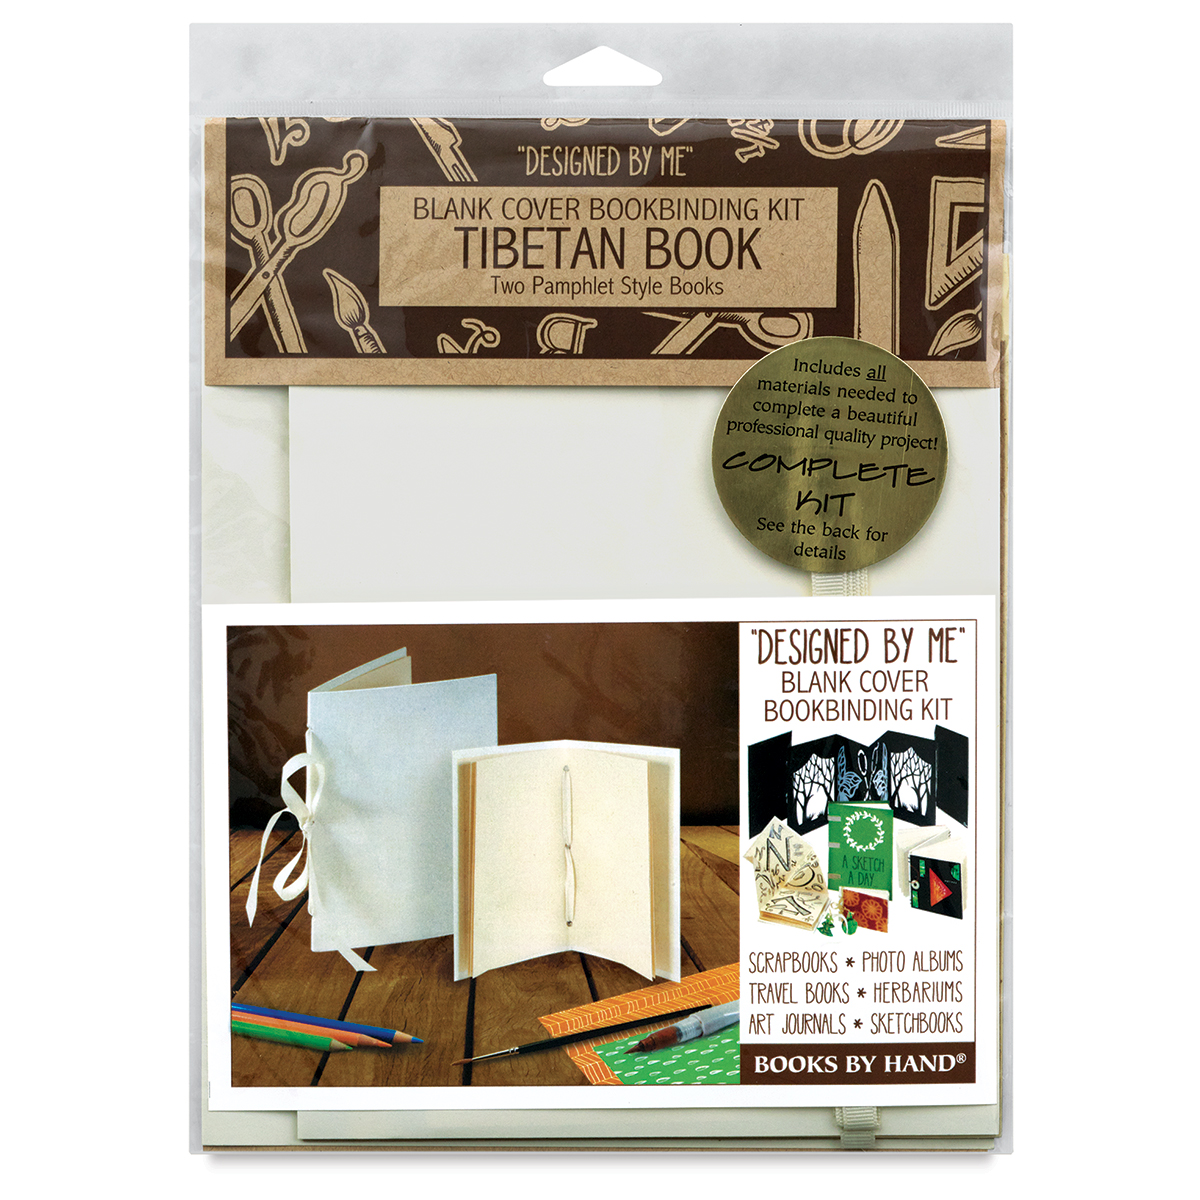 Books by Hand Designed by Me Blank Cover Bookbinding Kit Tibetan Book, Ivory 4.25x6.5 & 5X7.5